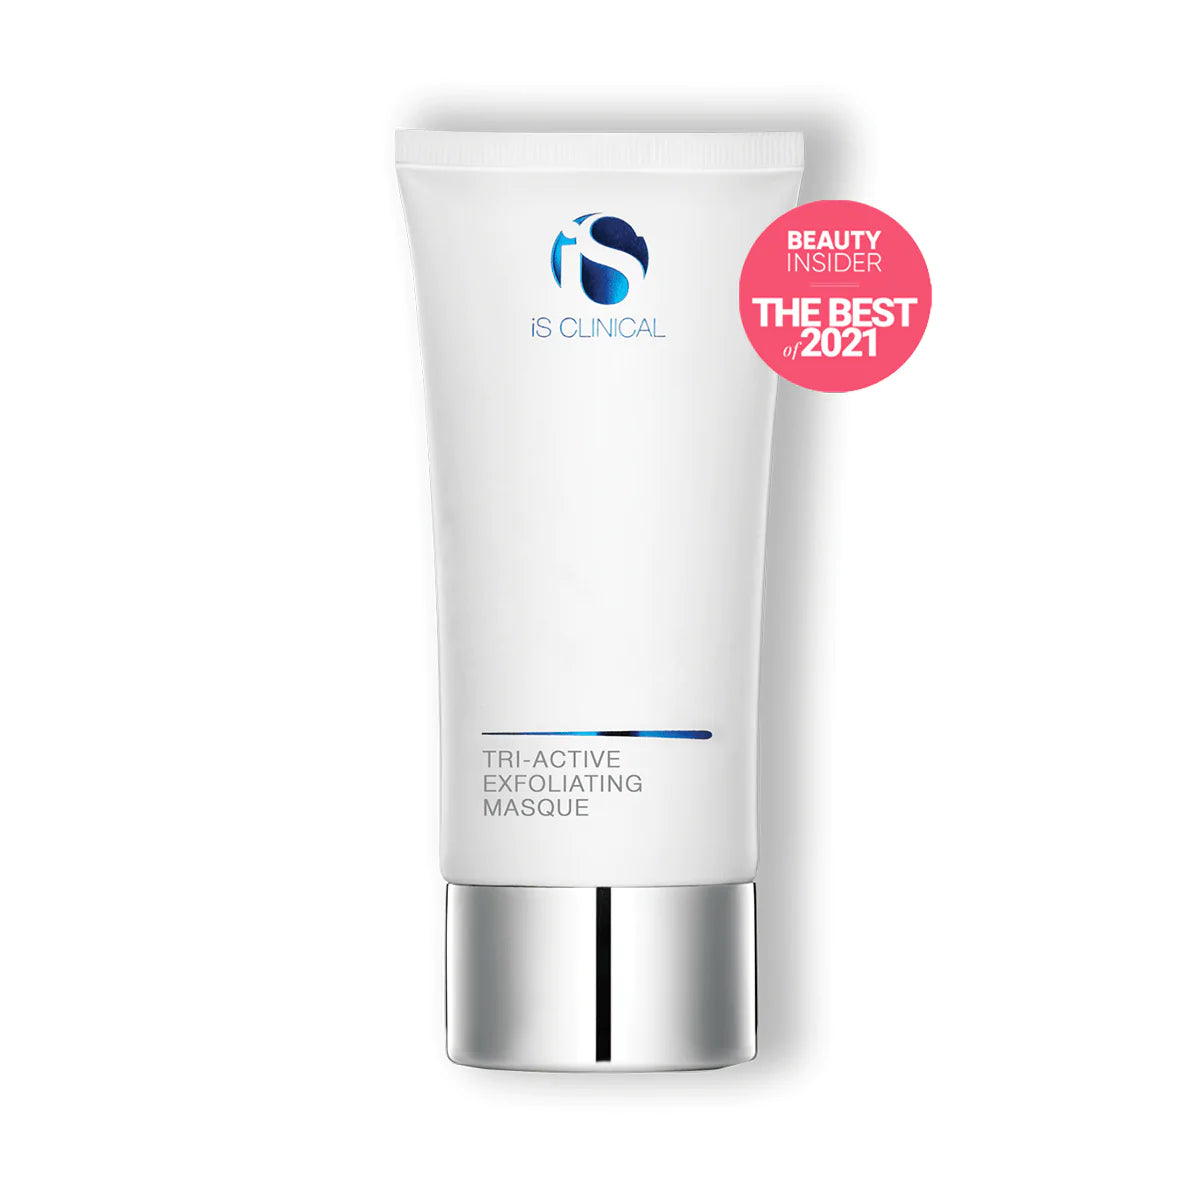 IS Clinical-Tri-Active Exfoliating Masque